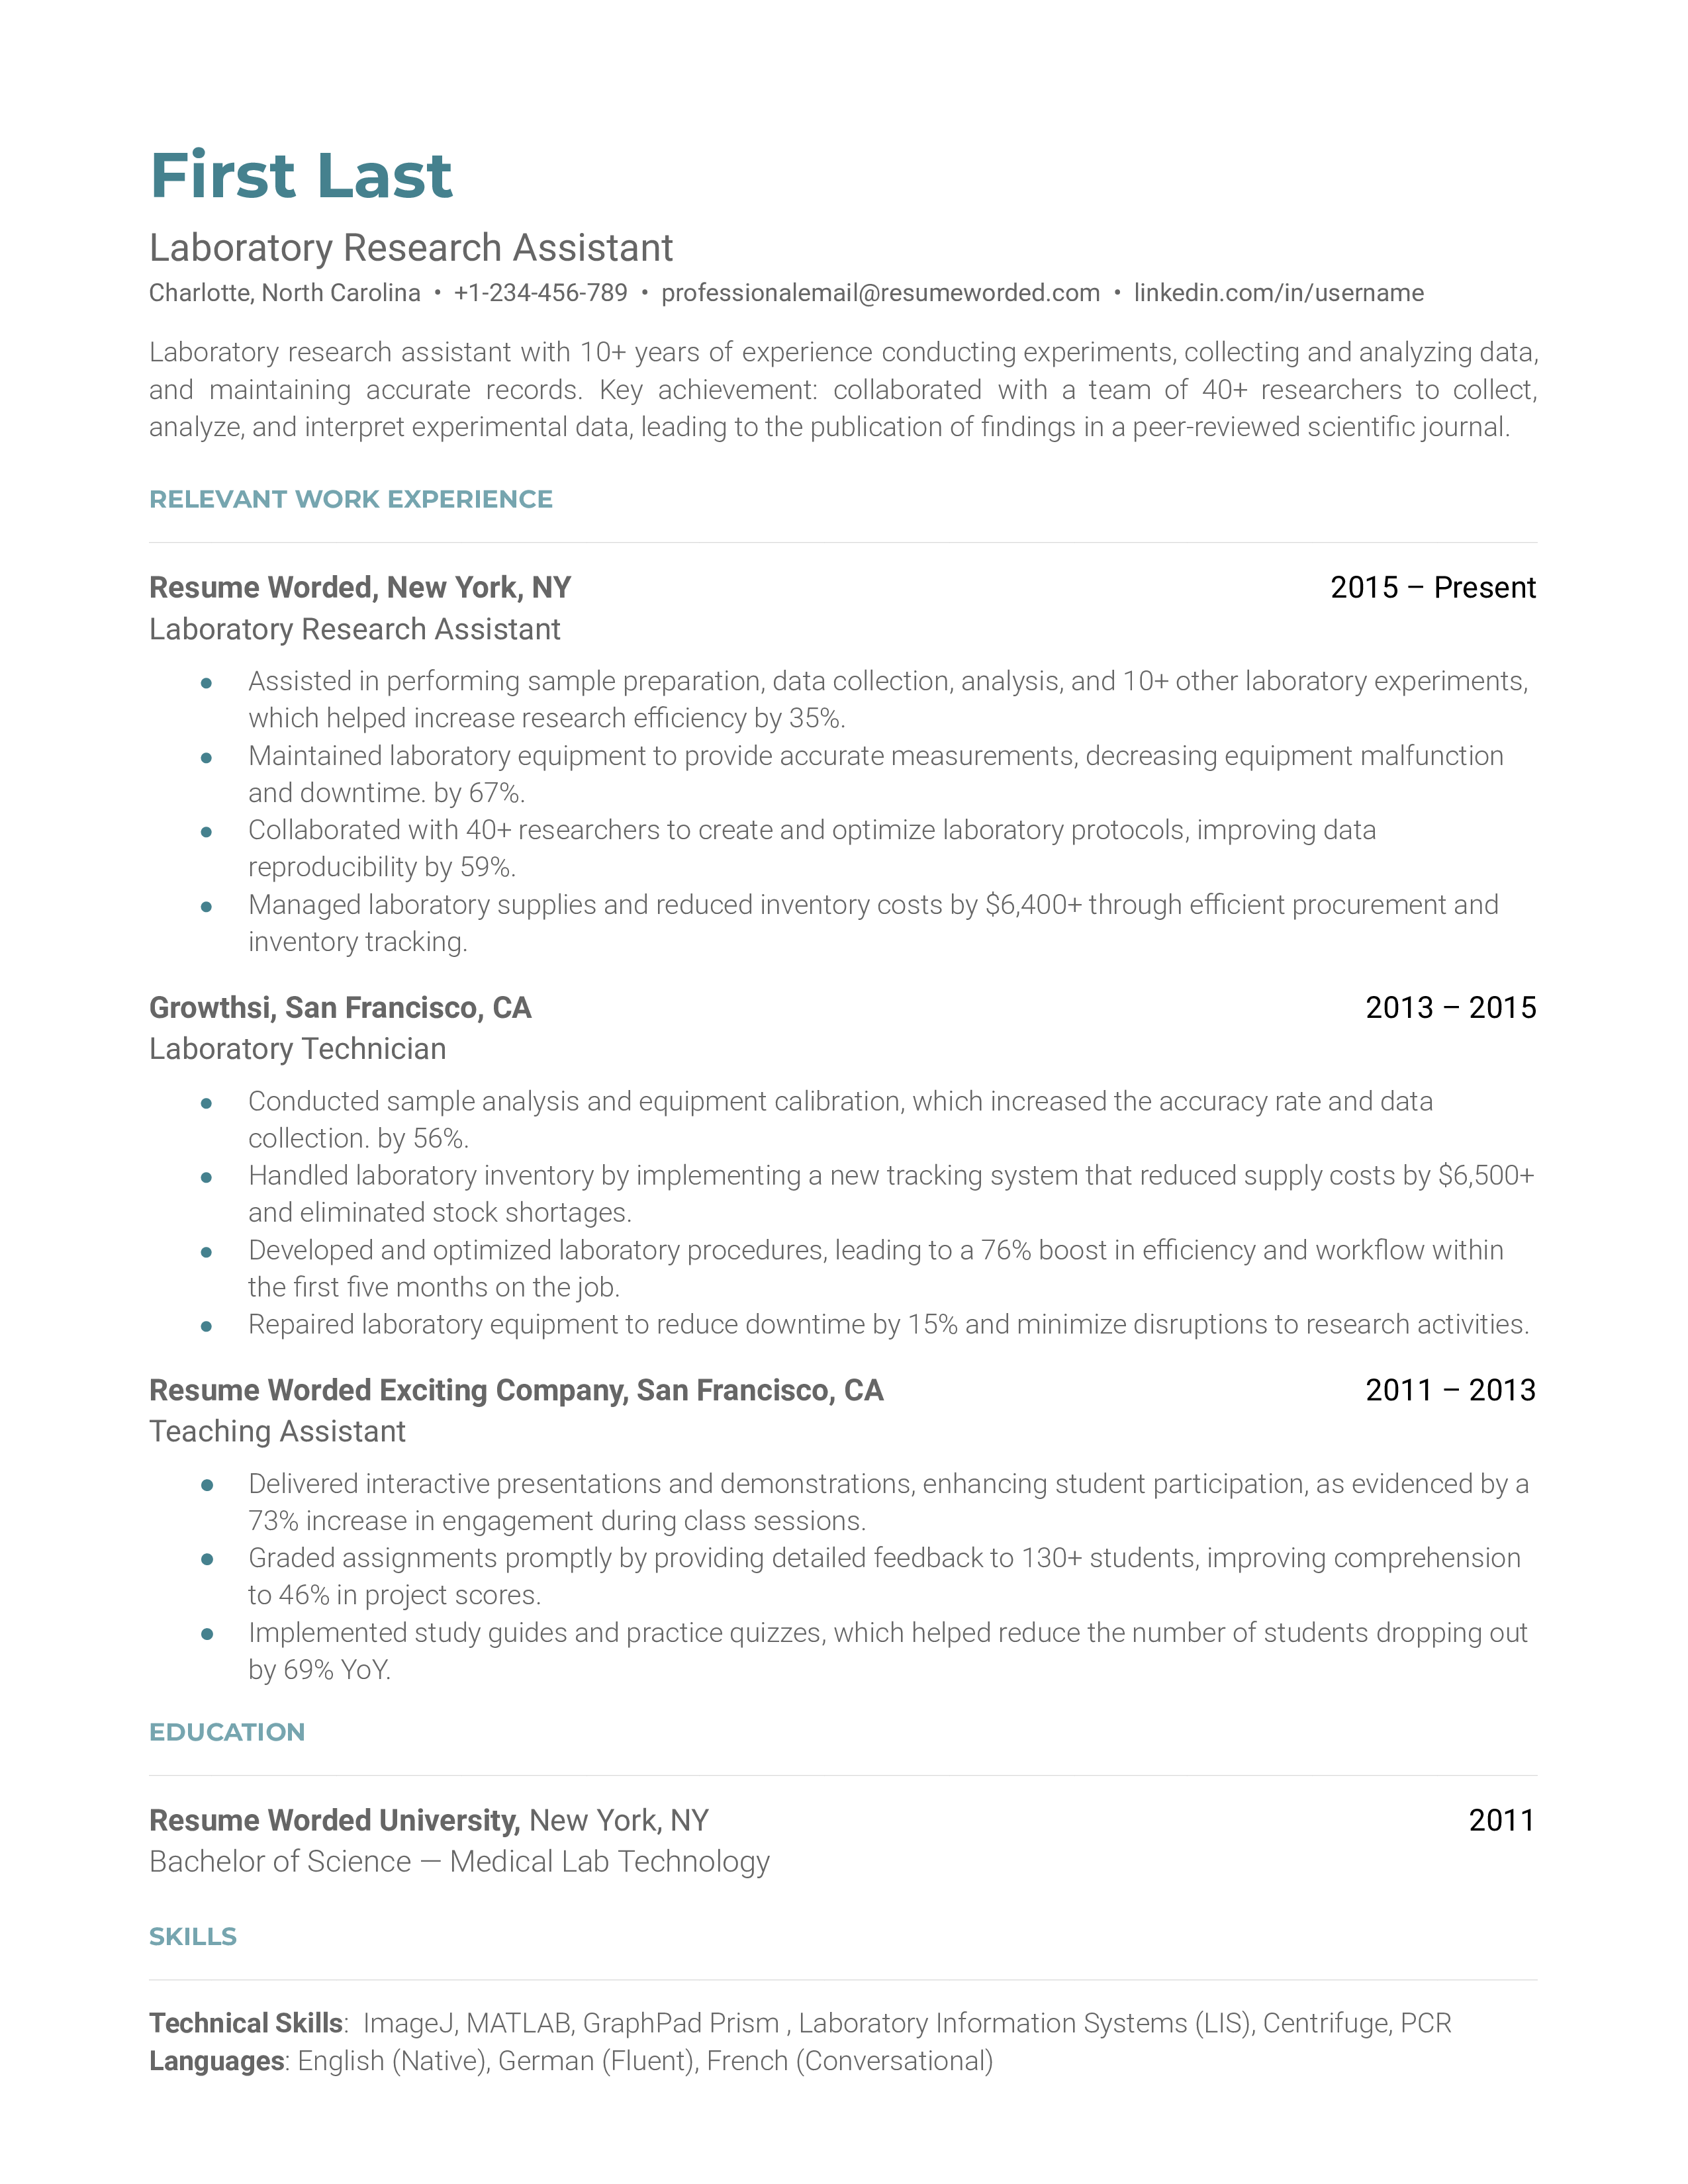 A resume for a Laboratory Research Assistant highlighting specific lab and computational skills.